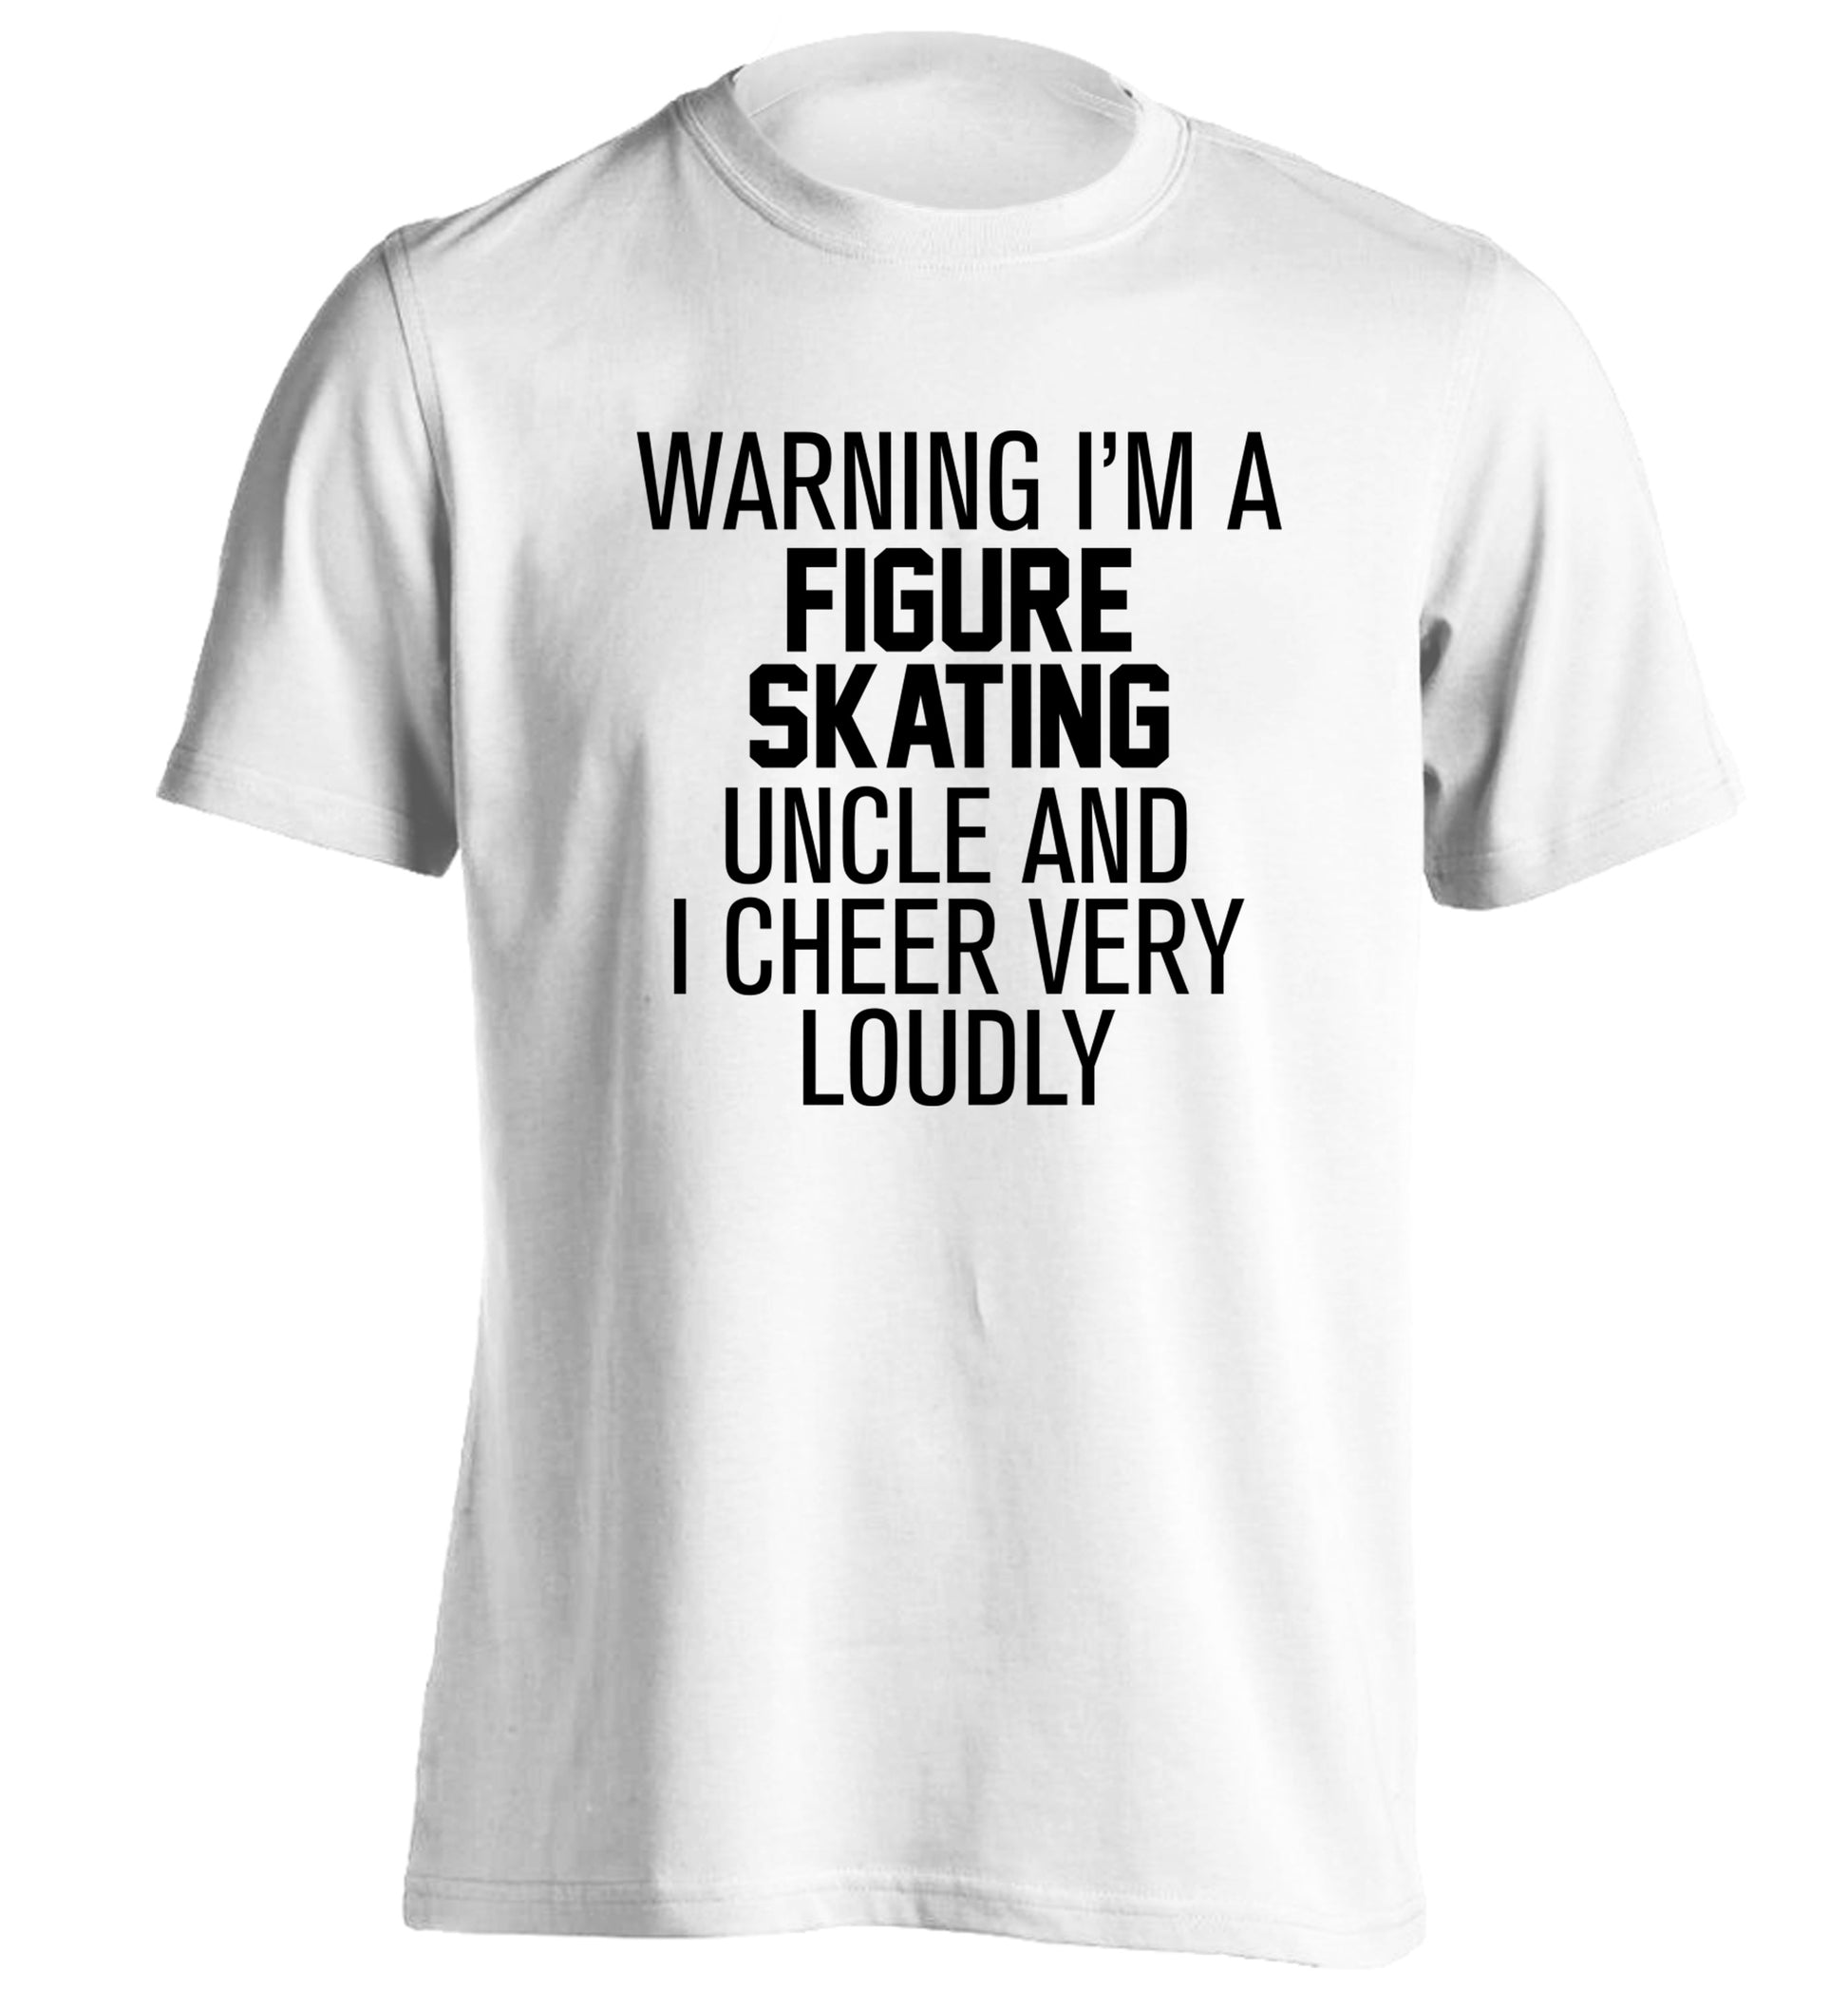 Warning I'm a figure skating uncle and I cheer very loudly adults unisexwhite Tshirt 2XL